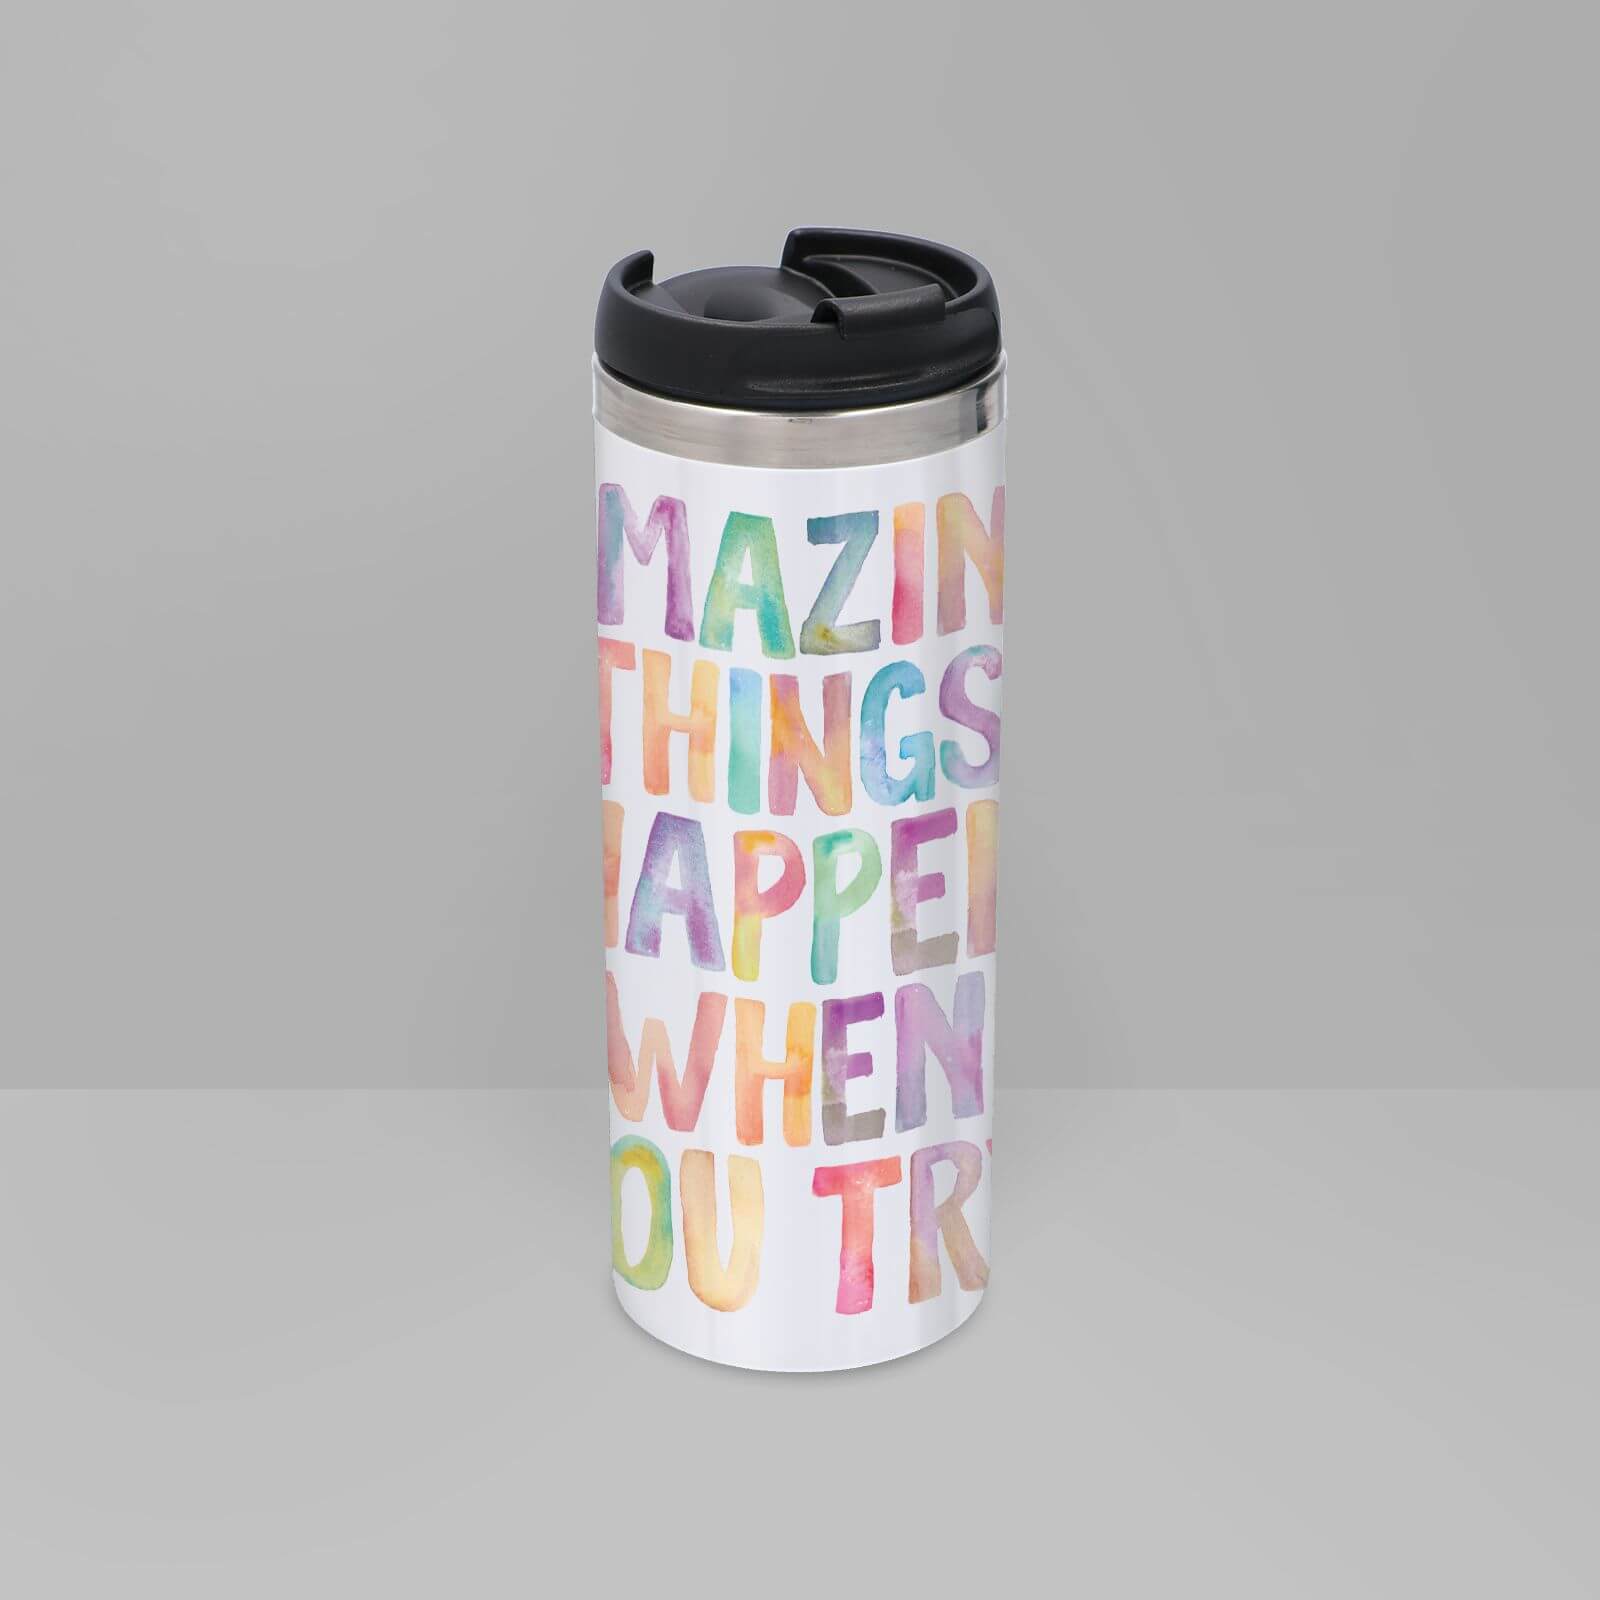 The Motivated Type Amazing Things Happen When You Try Thermo Travel Mug